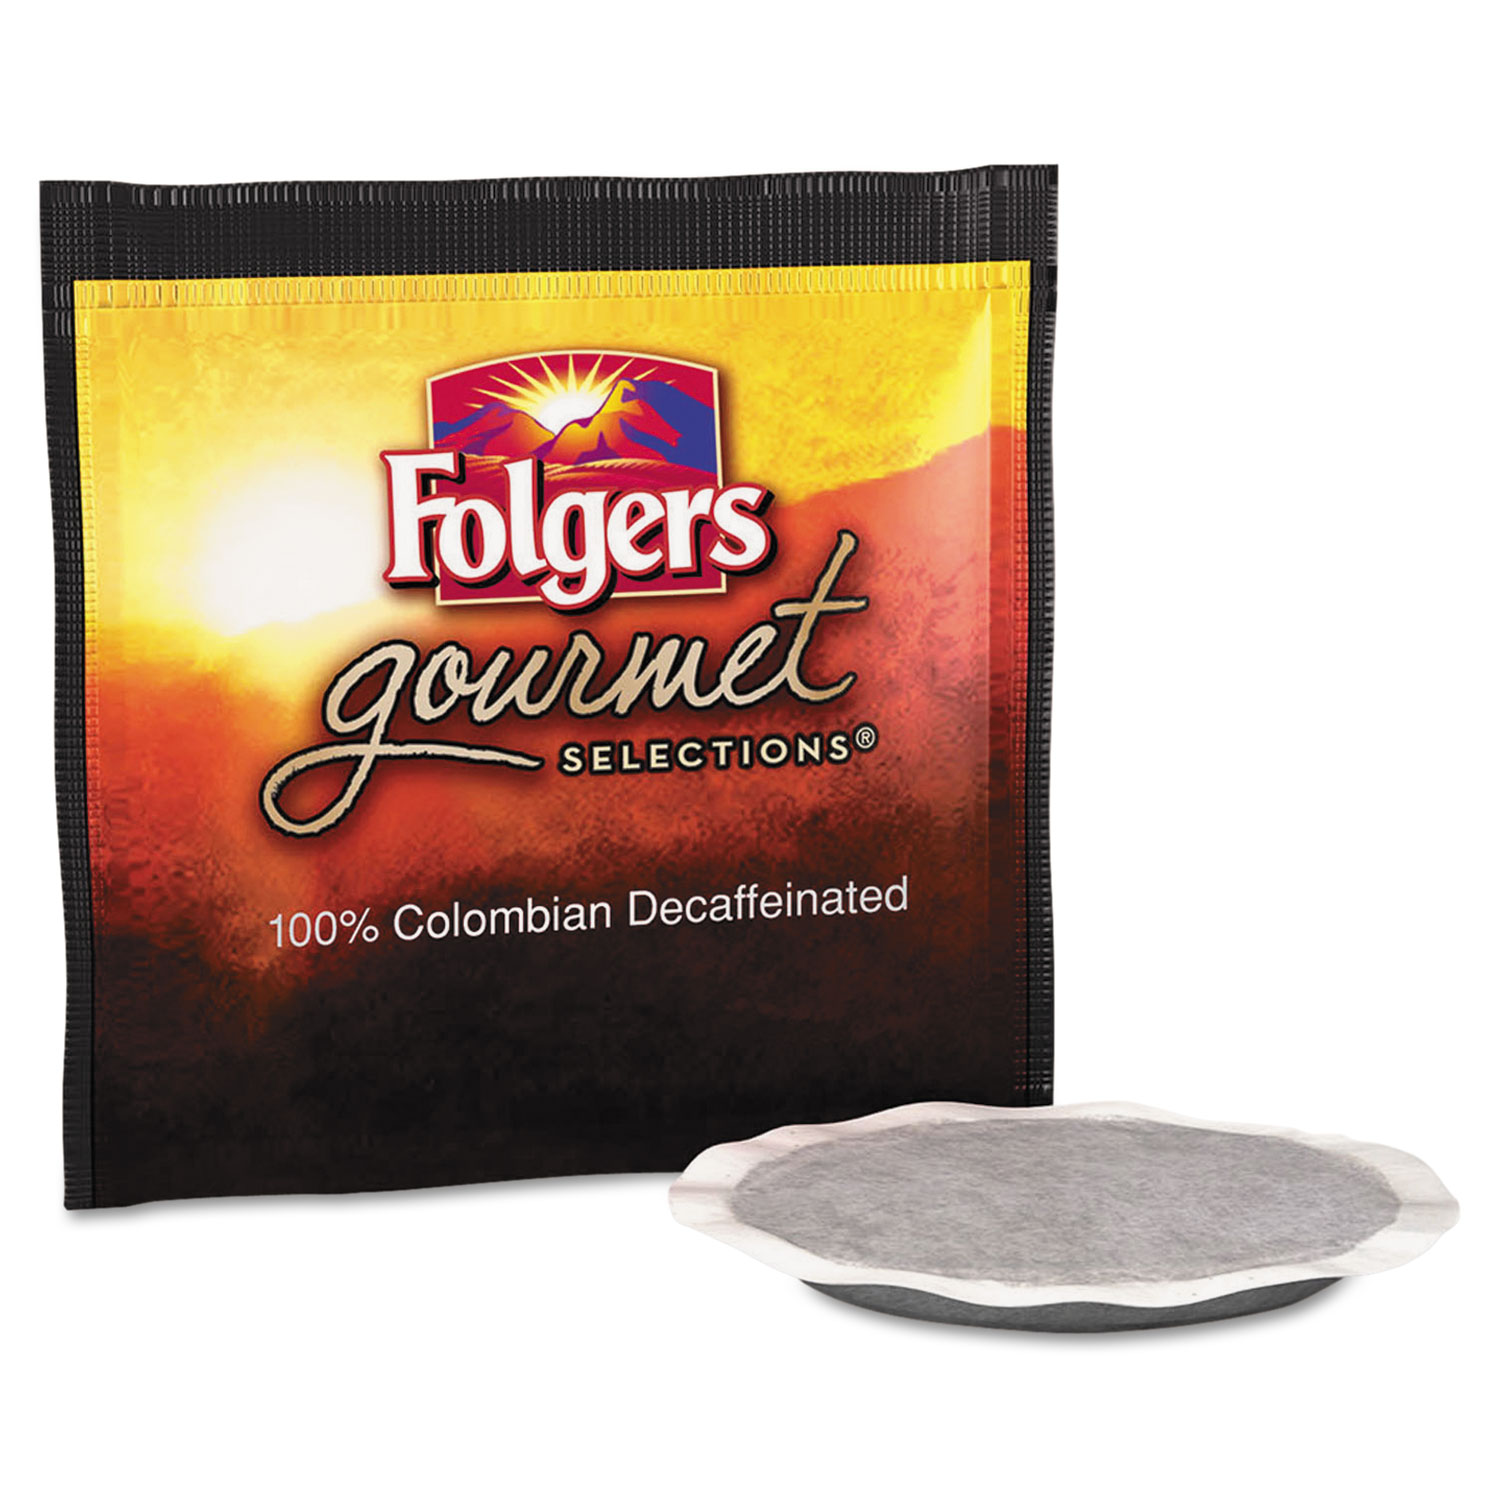  Folgers 2550063101 Gourmet Selections Coffee Pods, 100% Colombian Decaf, 18/Box (FOL63101) 